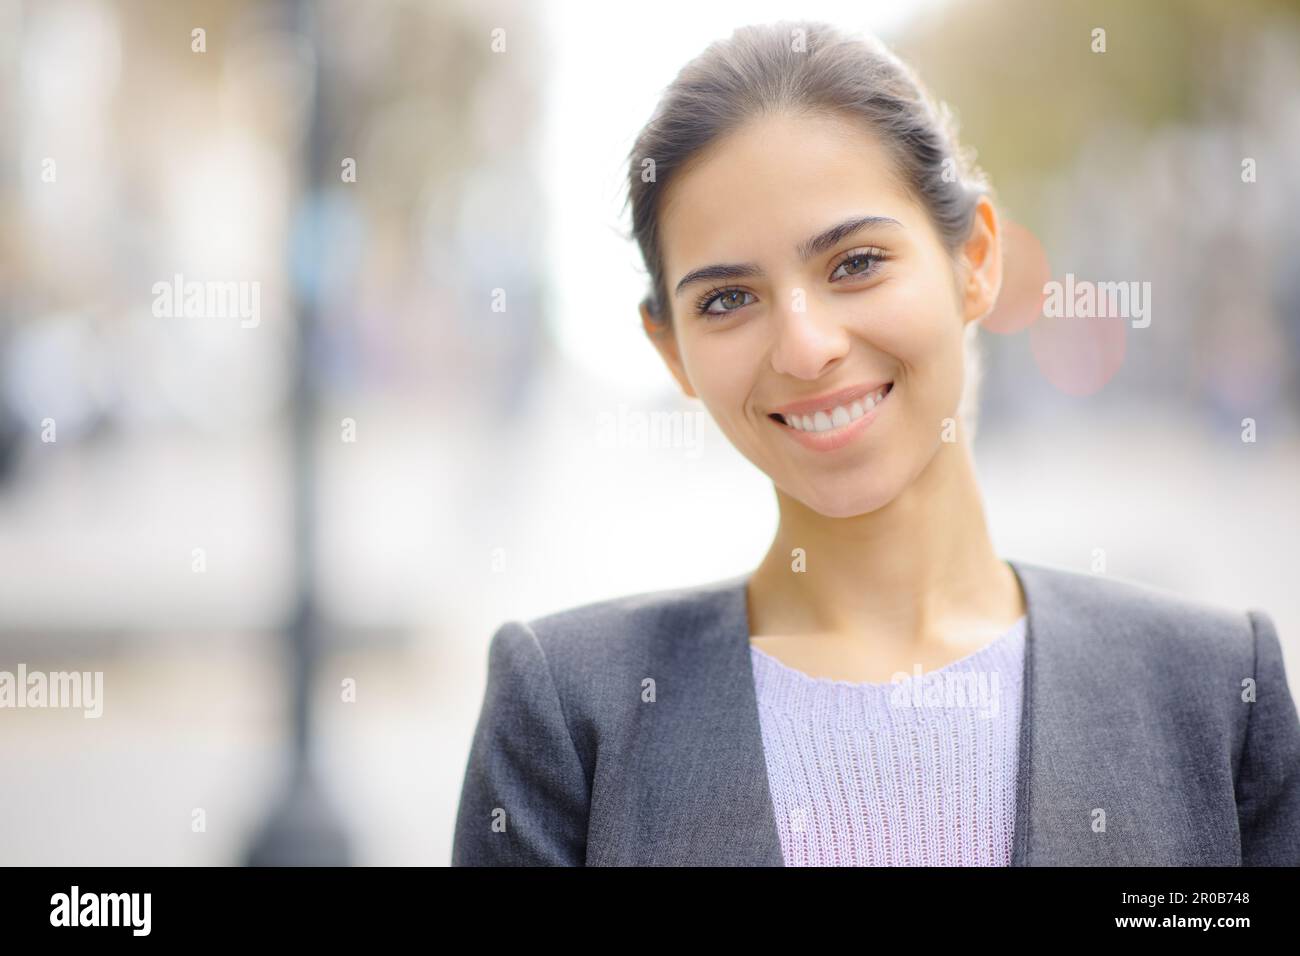 Front view portrait of a happy young executive looking at camera in the street Stock Photo